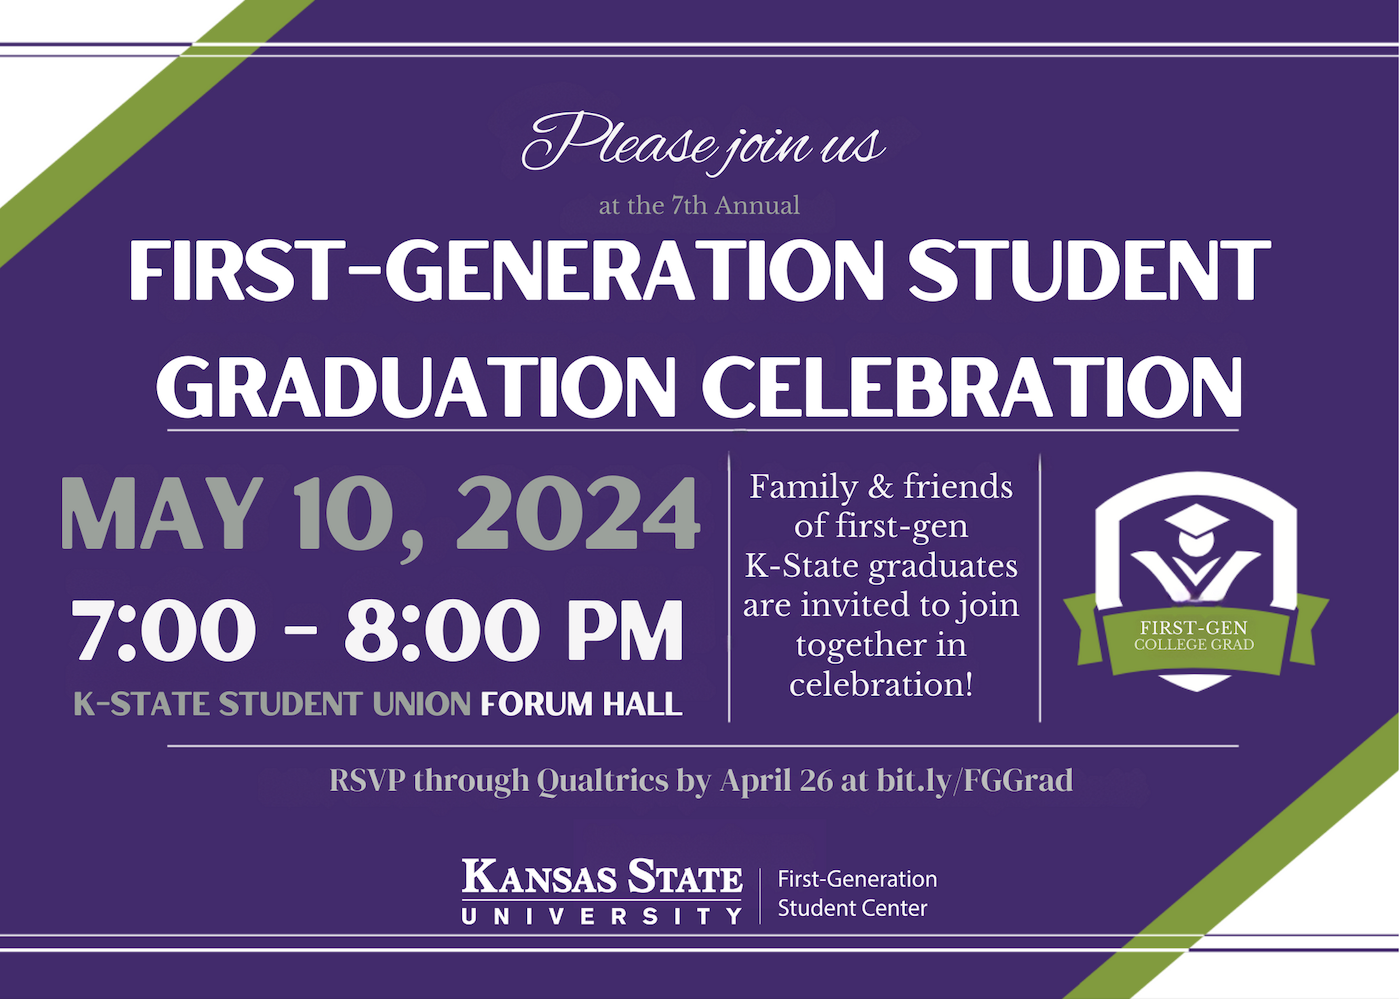 Invitation for the First-generation Graduation Celebration on May 10, 2024 in Forum Hall at 7:00 pm. Image can be clicked on to a link to RSVP.